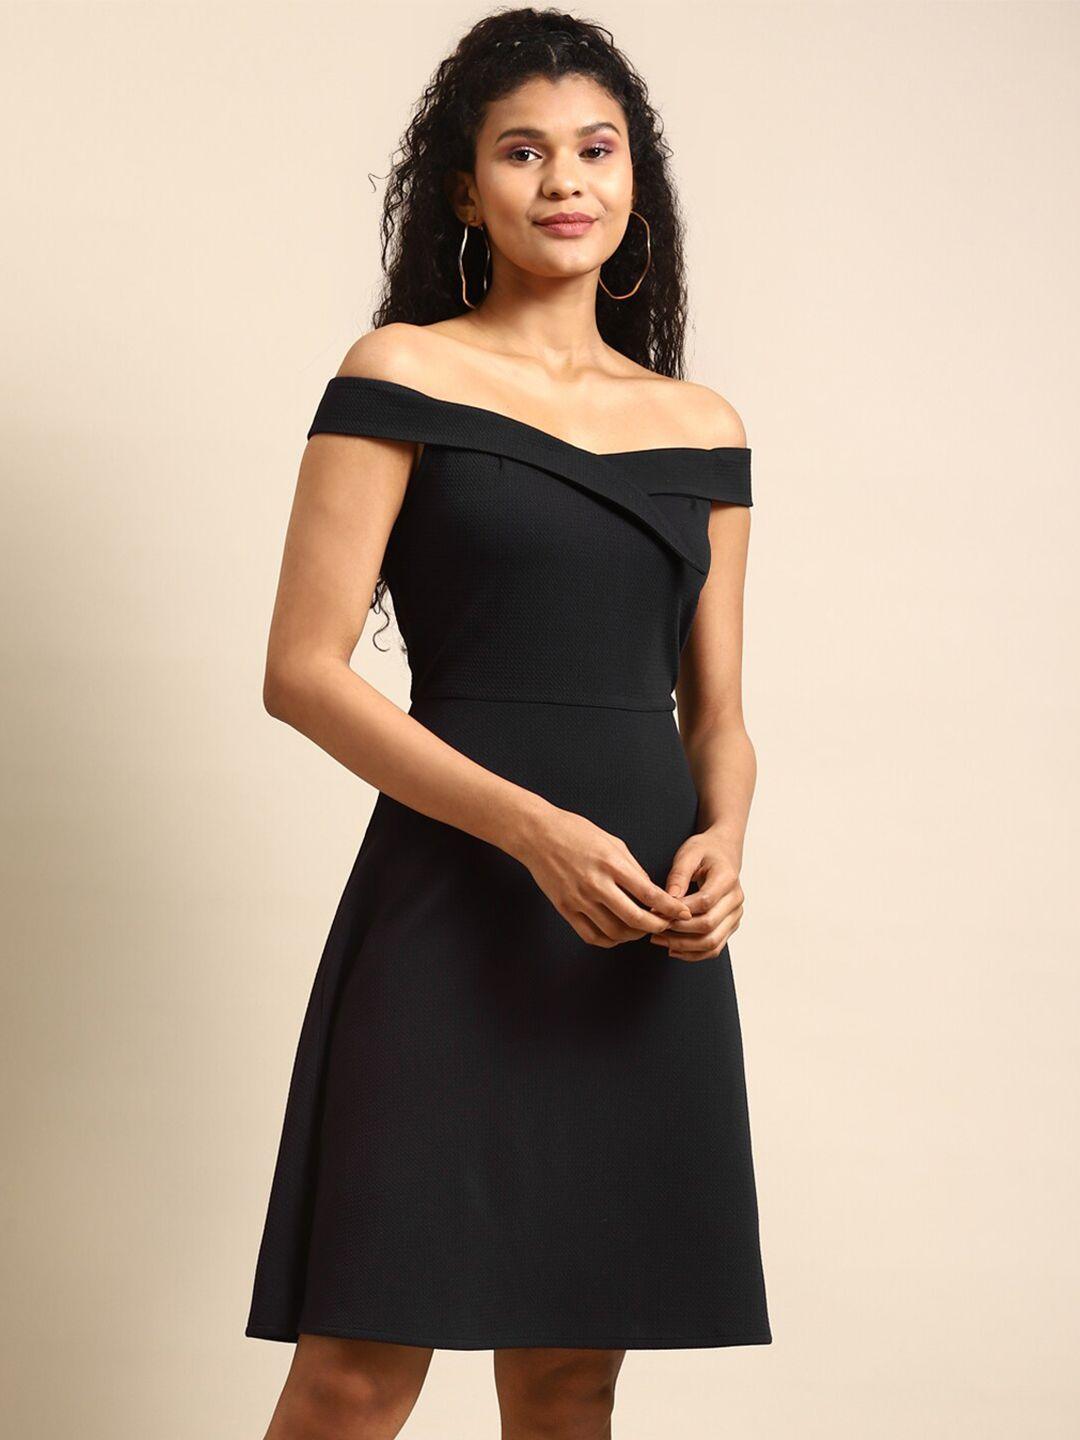 dodo & moa off-shoulder fit and flare dress